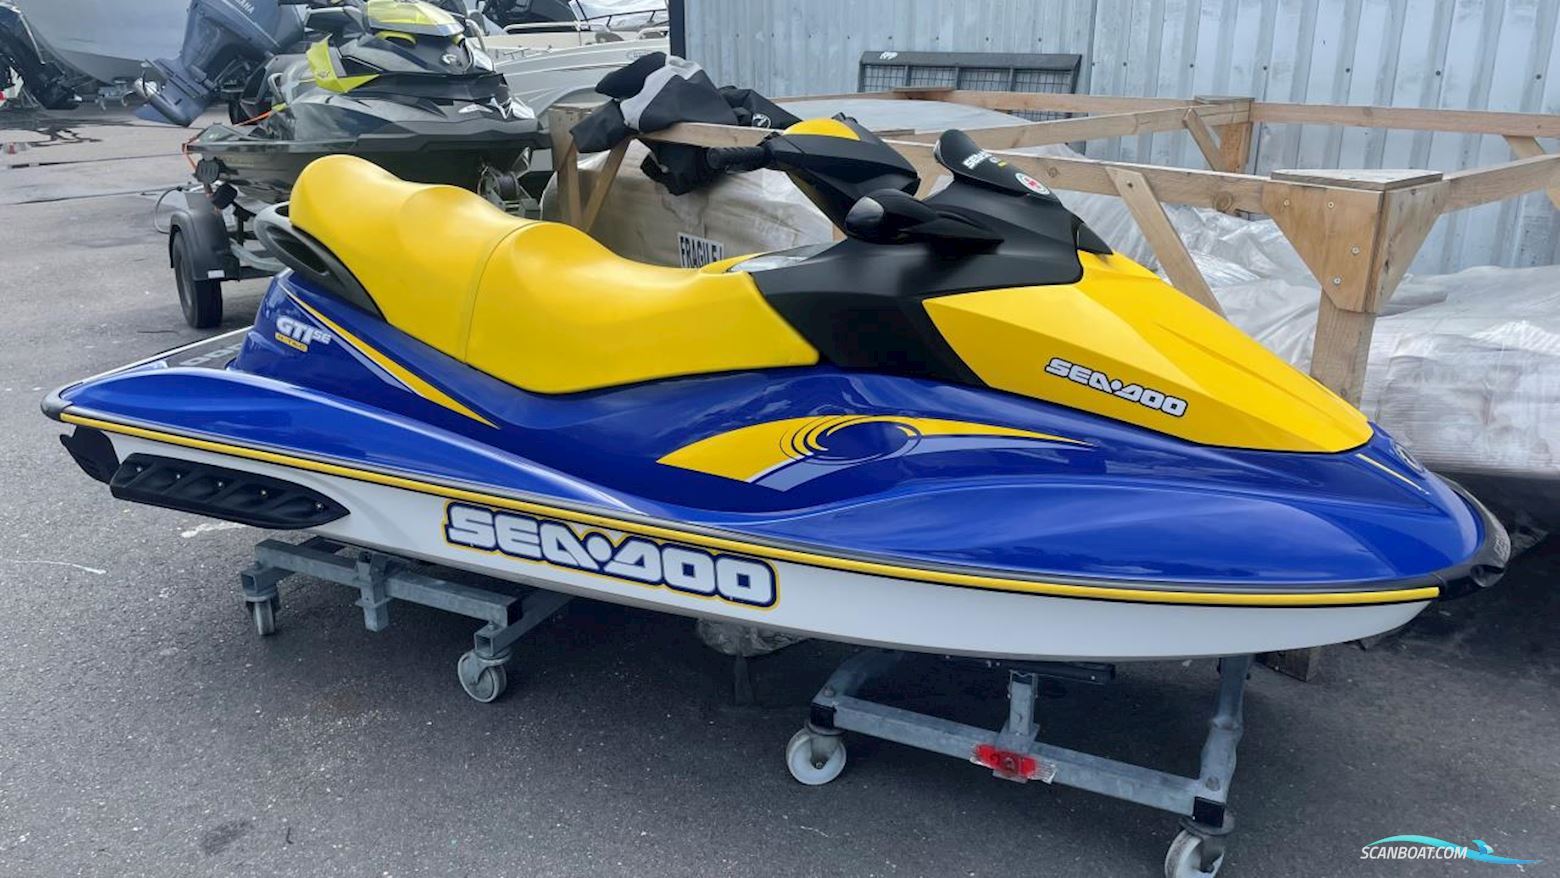 Sea-Doo Gti Motor boat 2006, with Rotax engine, Sweden